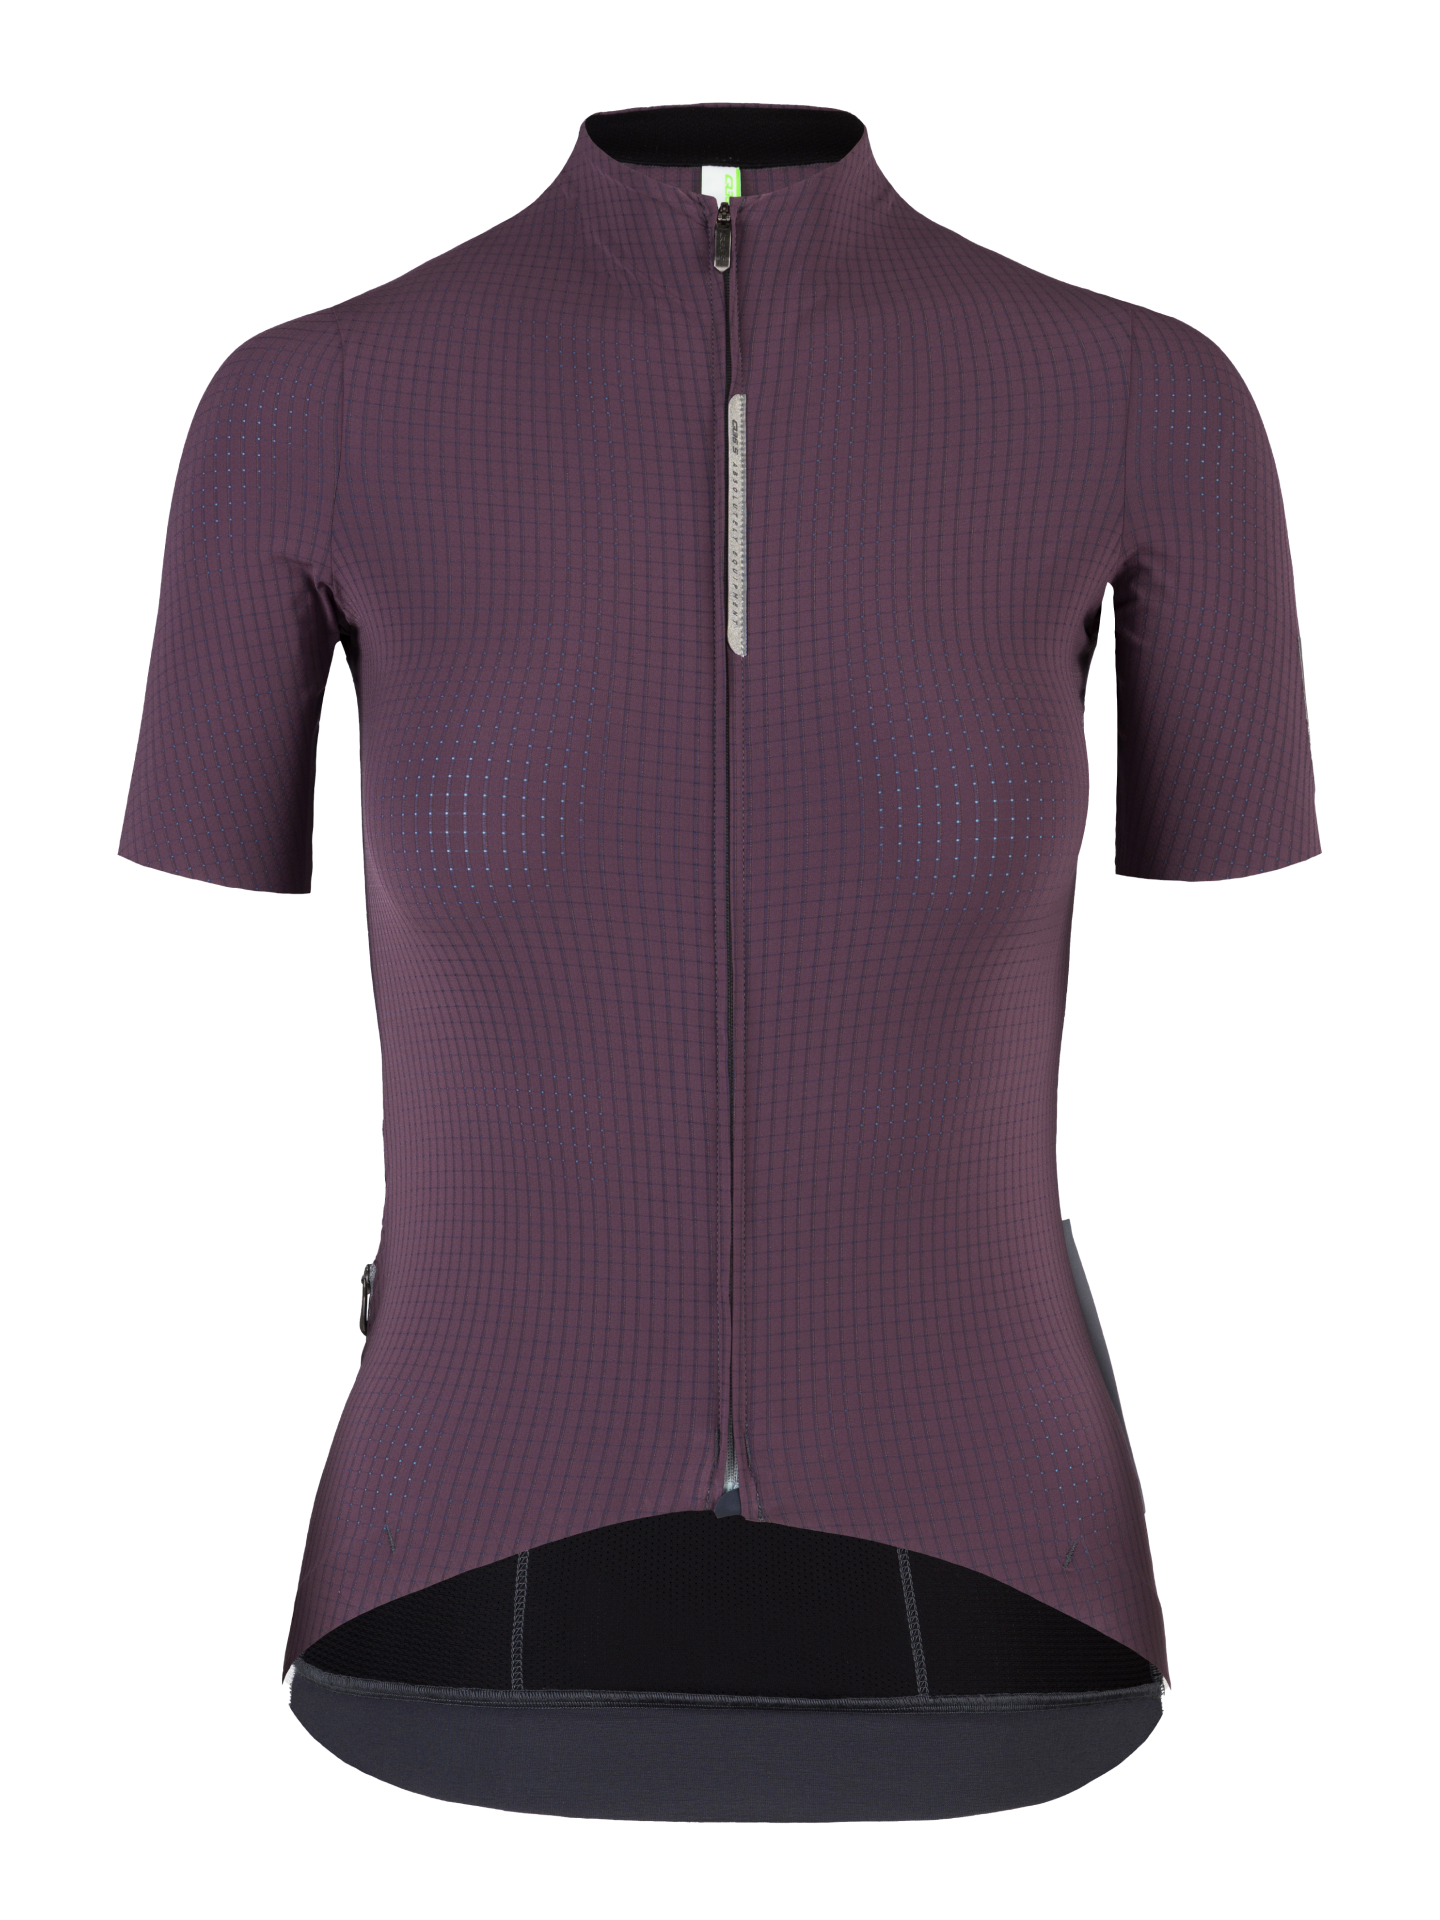 Q36.5 Women's L1 Long Sleeve Pinstripe X Jersey — Clubhaus × The Cyclery